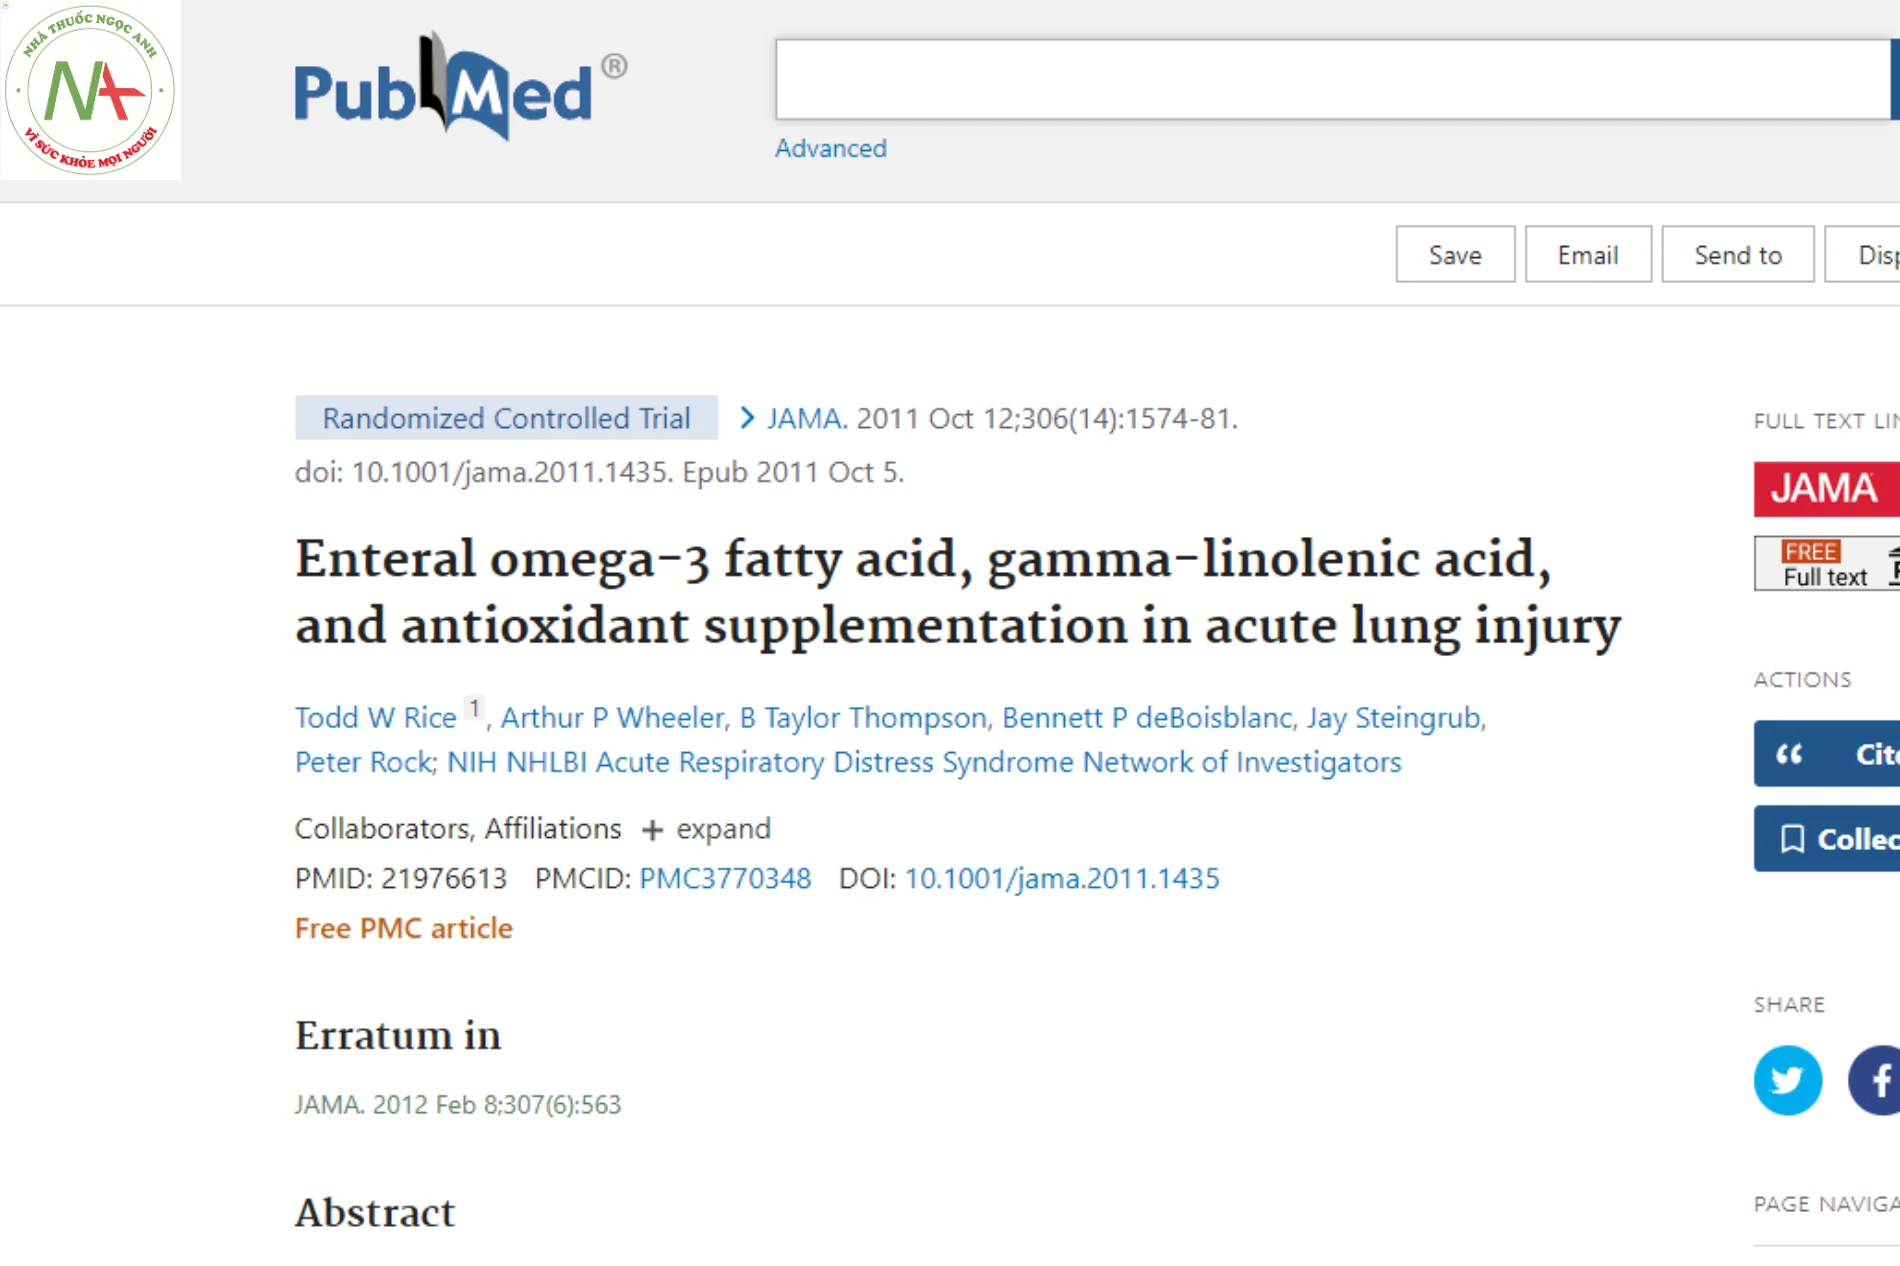 Enteral omega-3 fatty acids, gamma-linolenic acid and antioxidant supplementation in acute lung injury.